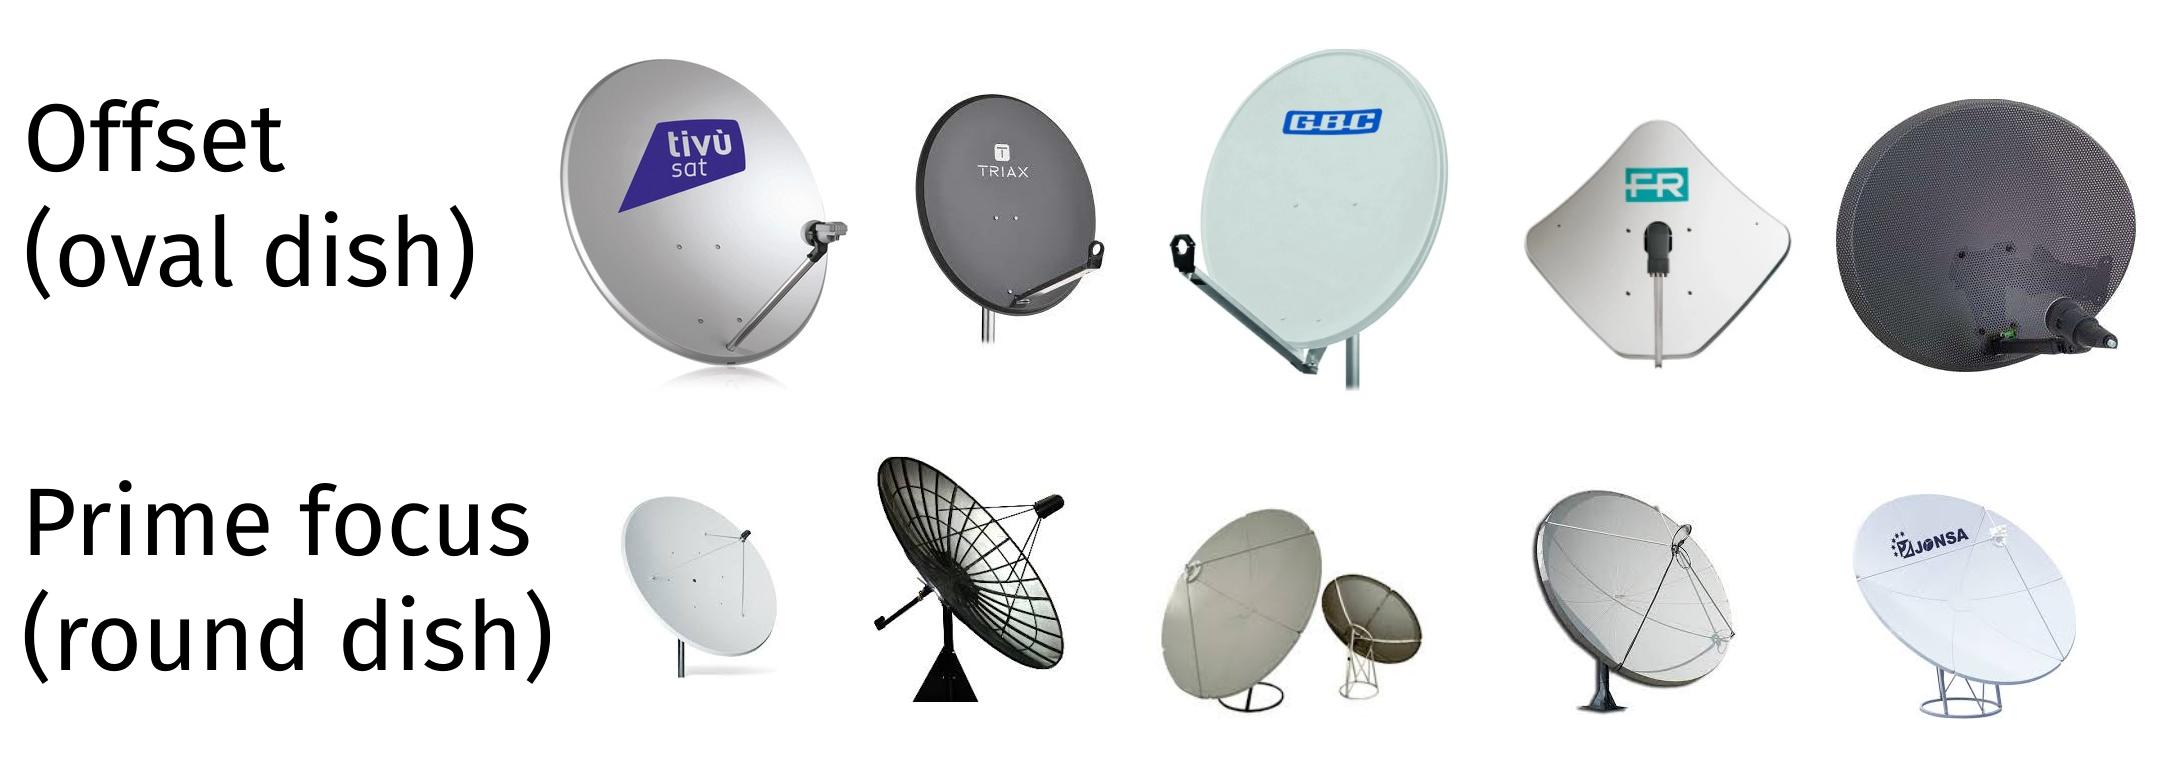 TV dishes